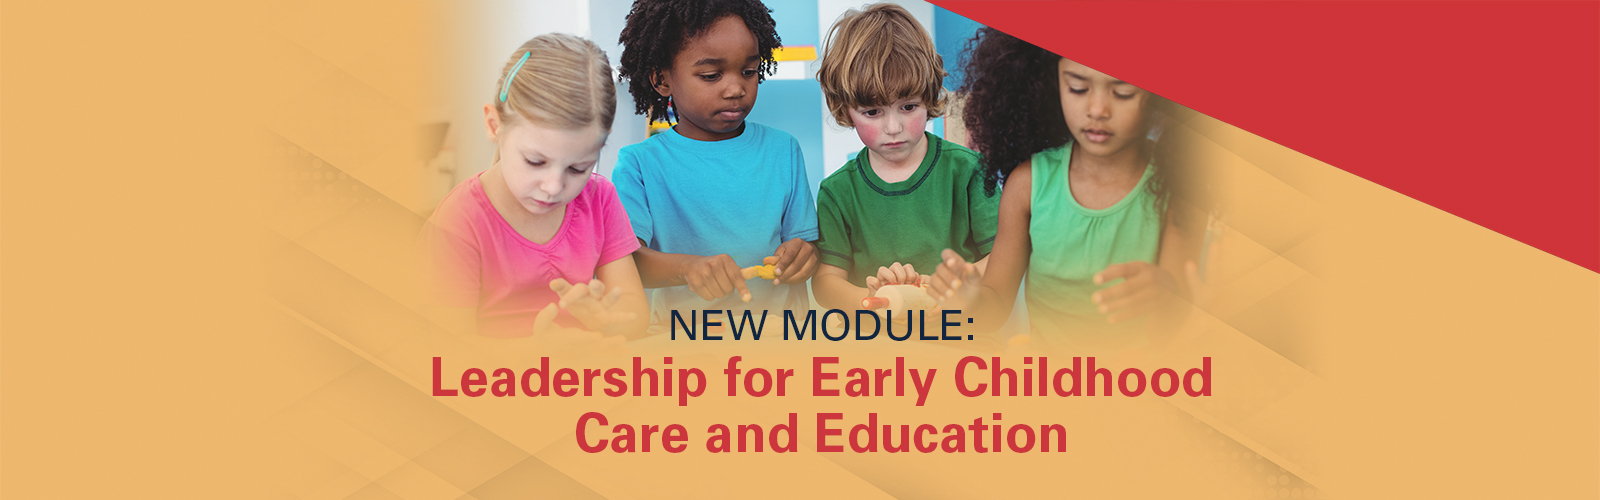 New Module: Leadership for Early Childhood Care and Education